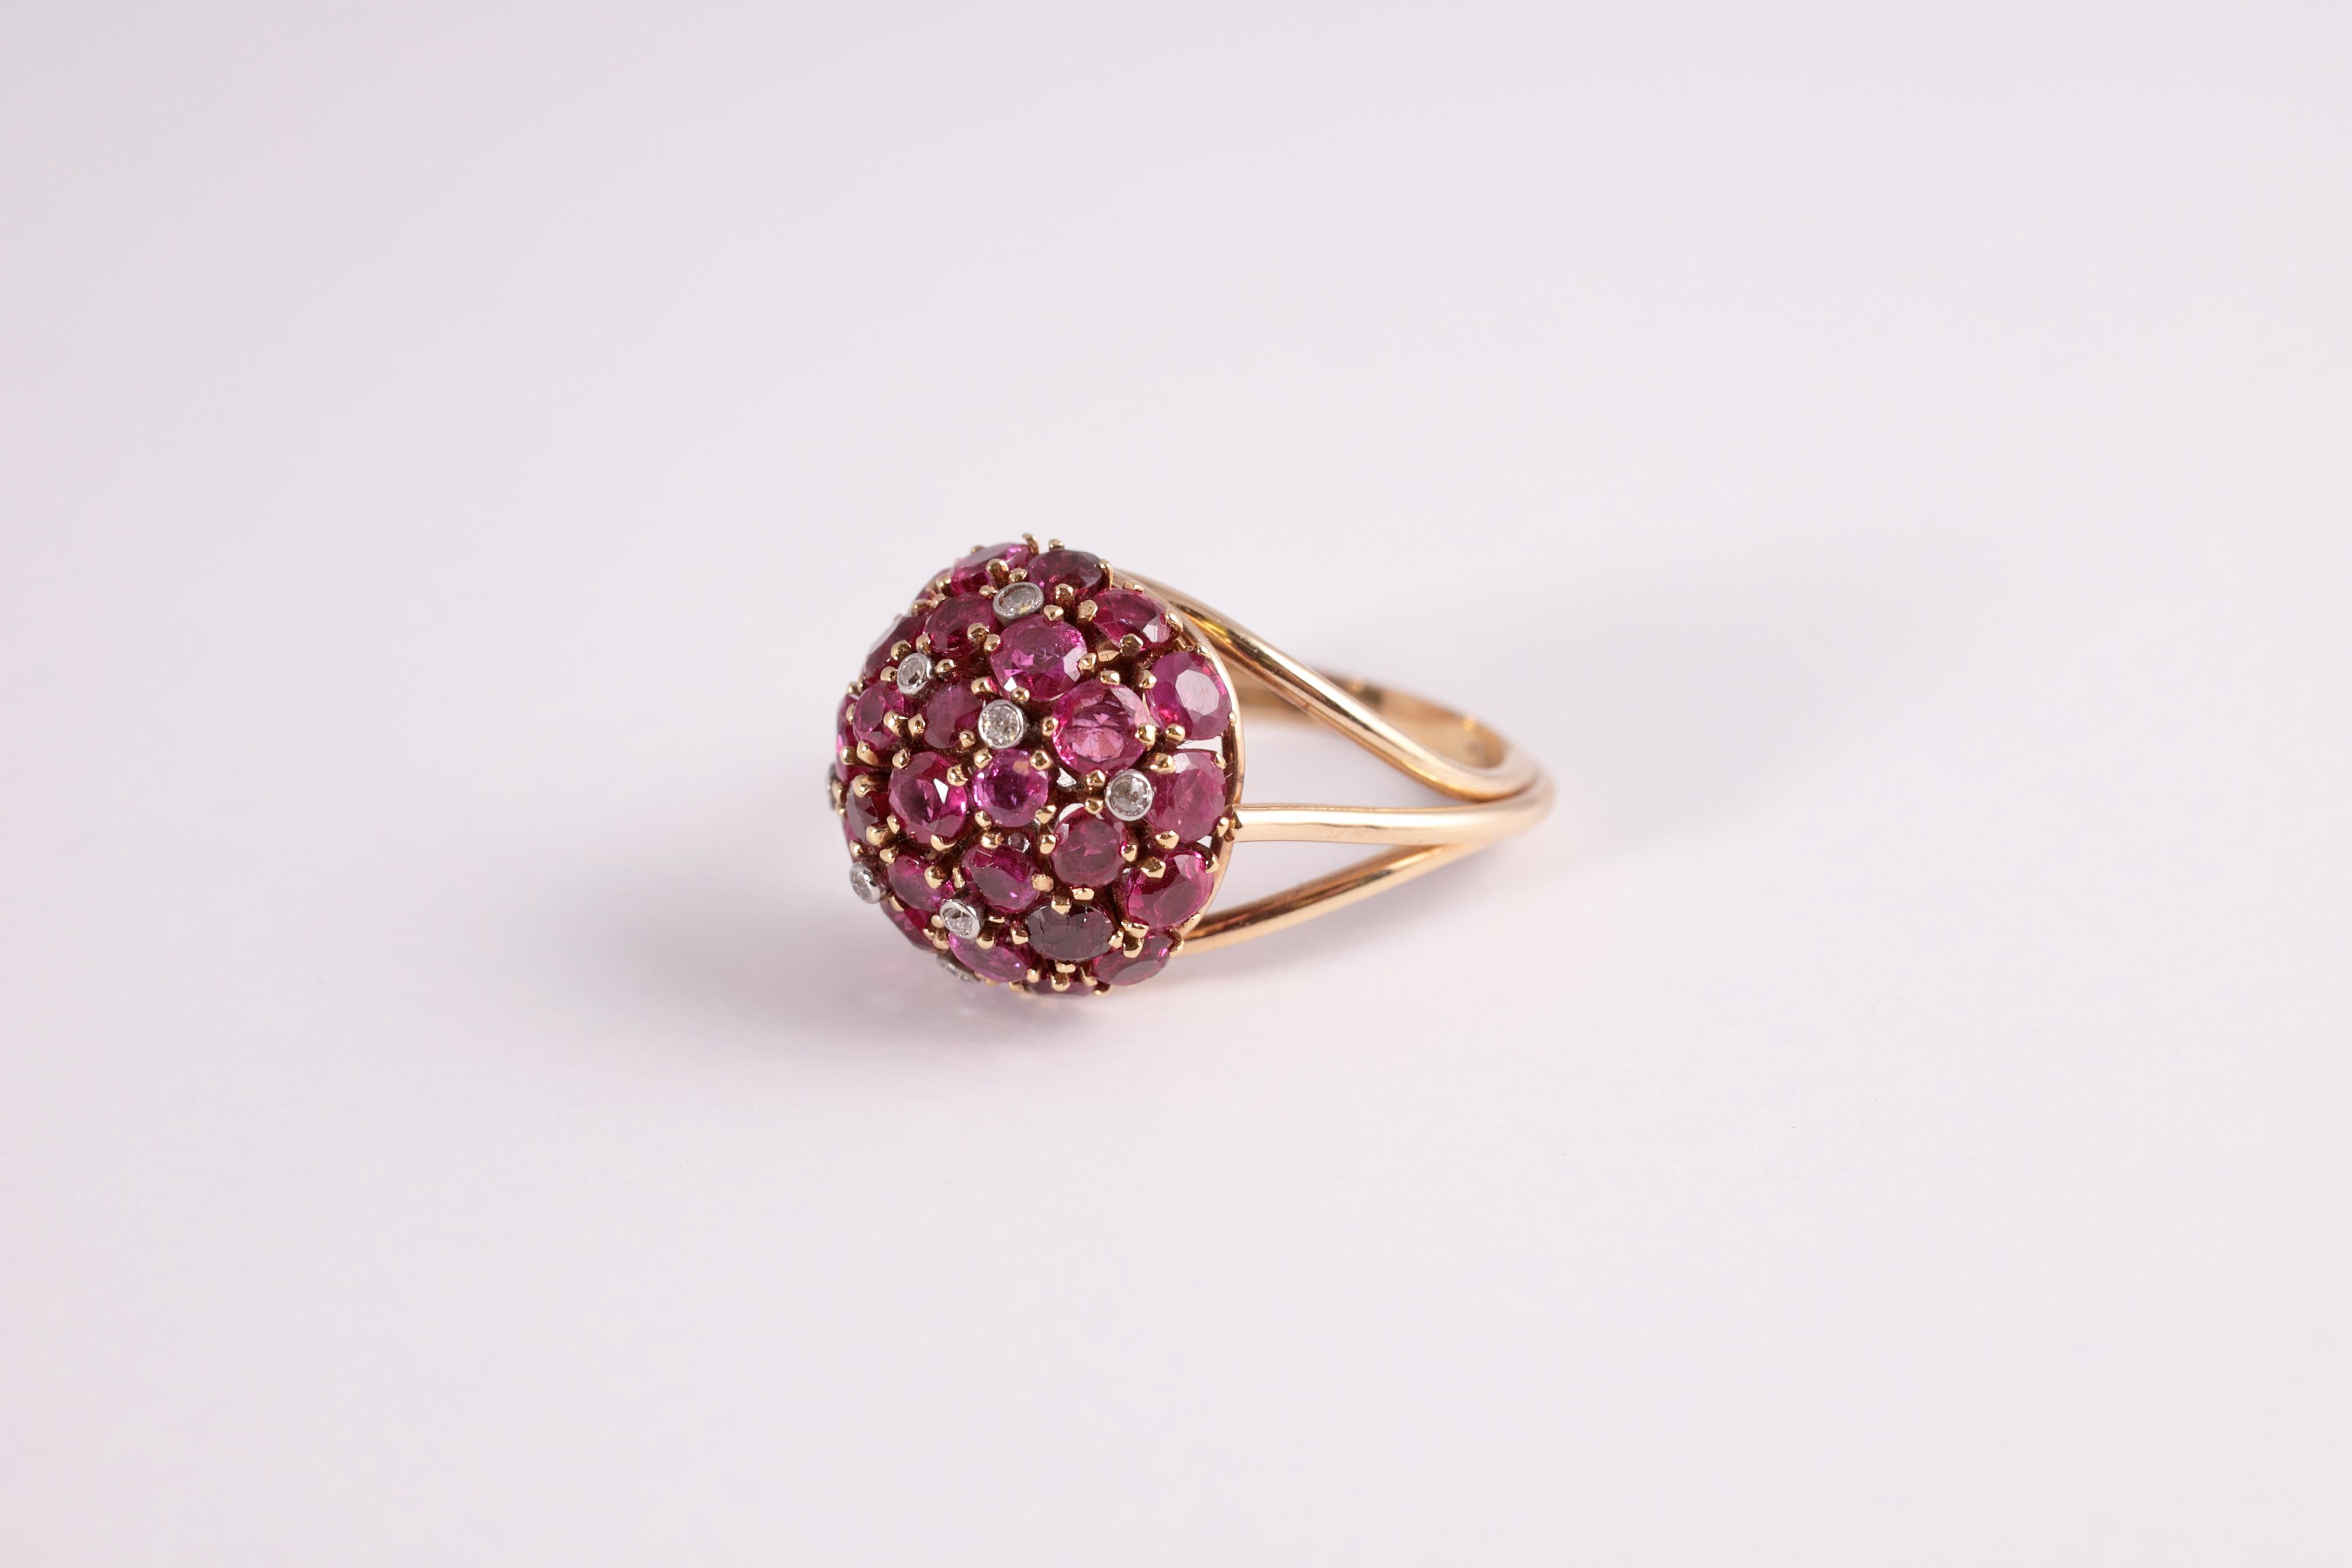 6.50 carats of rubies and .08 carats of diamonds are pave set to create this stunning round dome ring.  The stones are set in 14 karat yellow gold.  Size 8 1/4.